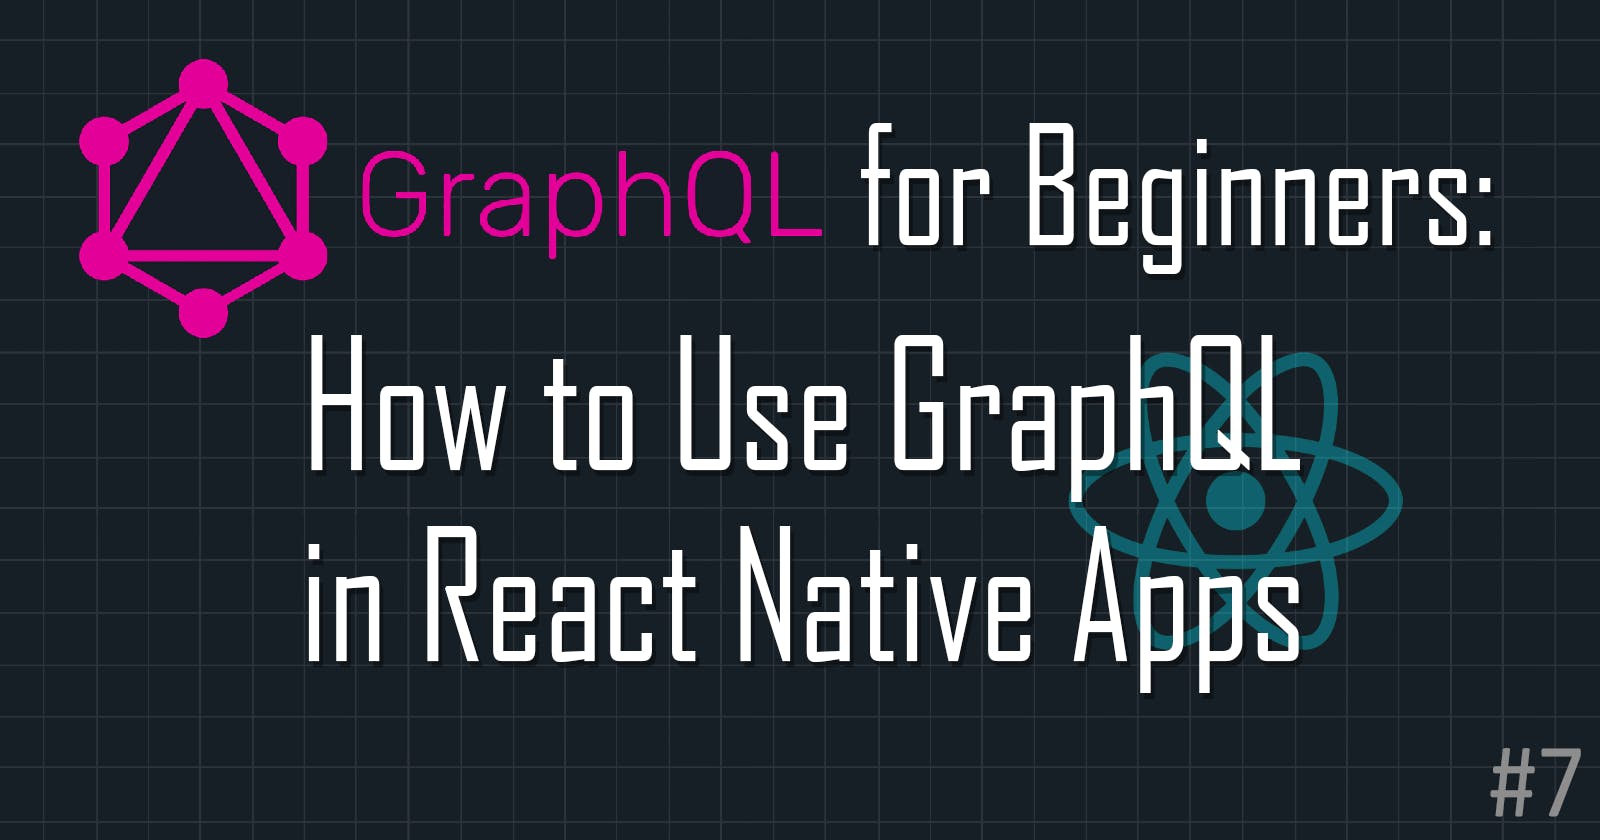 How to use GraphQL in React Native